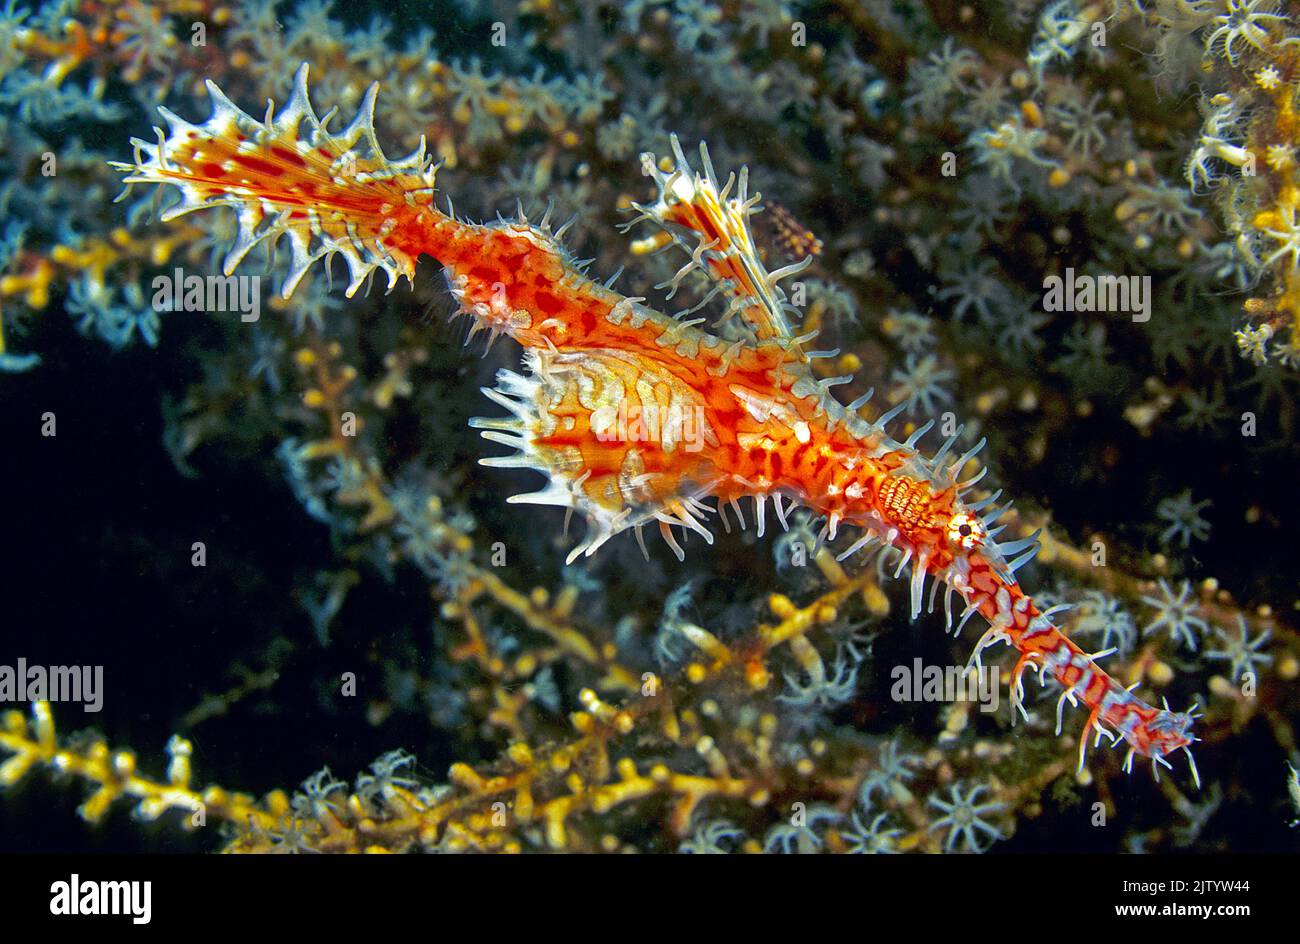 Ornate ghost pipefish or Harlequin ghost pipefish (Solenostomus paradoxus), at a horn coral, Ari Atoll, Maldives, Indian Ocean, Asia Stock Photo